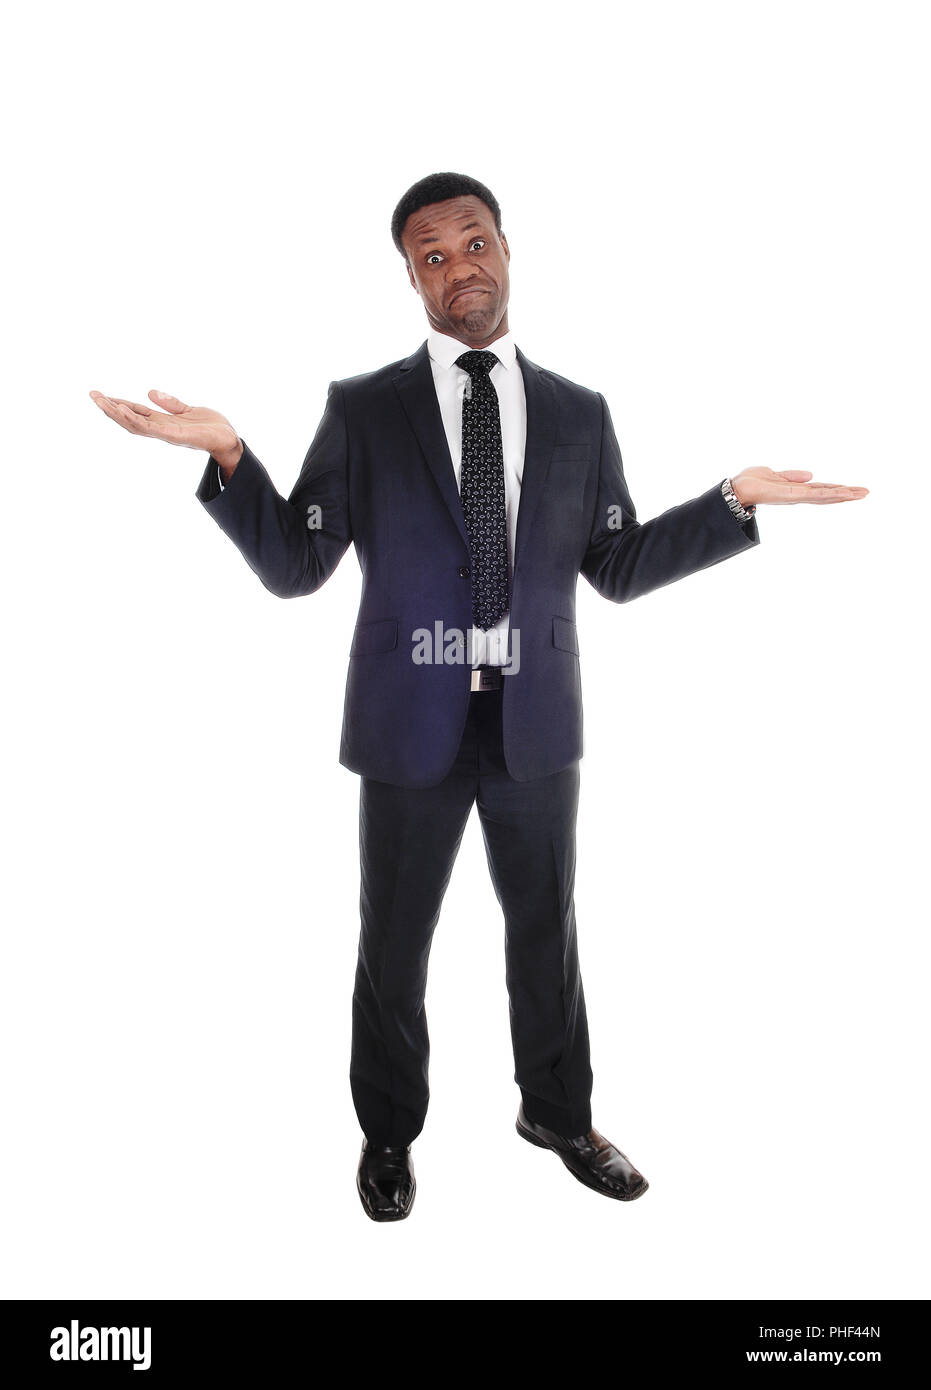 Business man gesturing I don't know Stock Photo